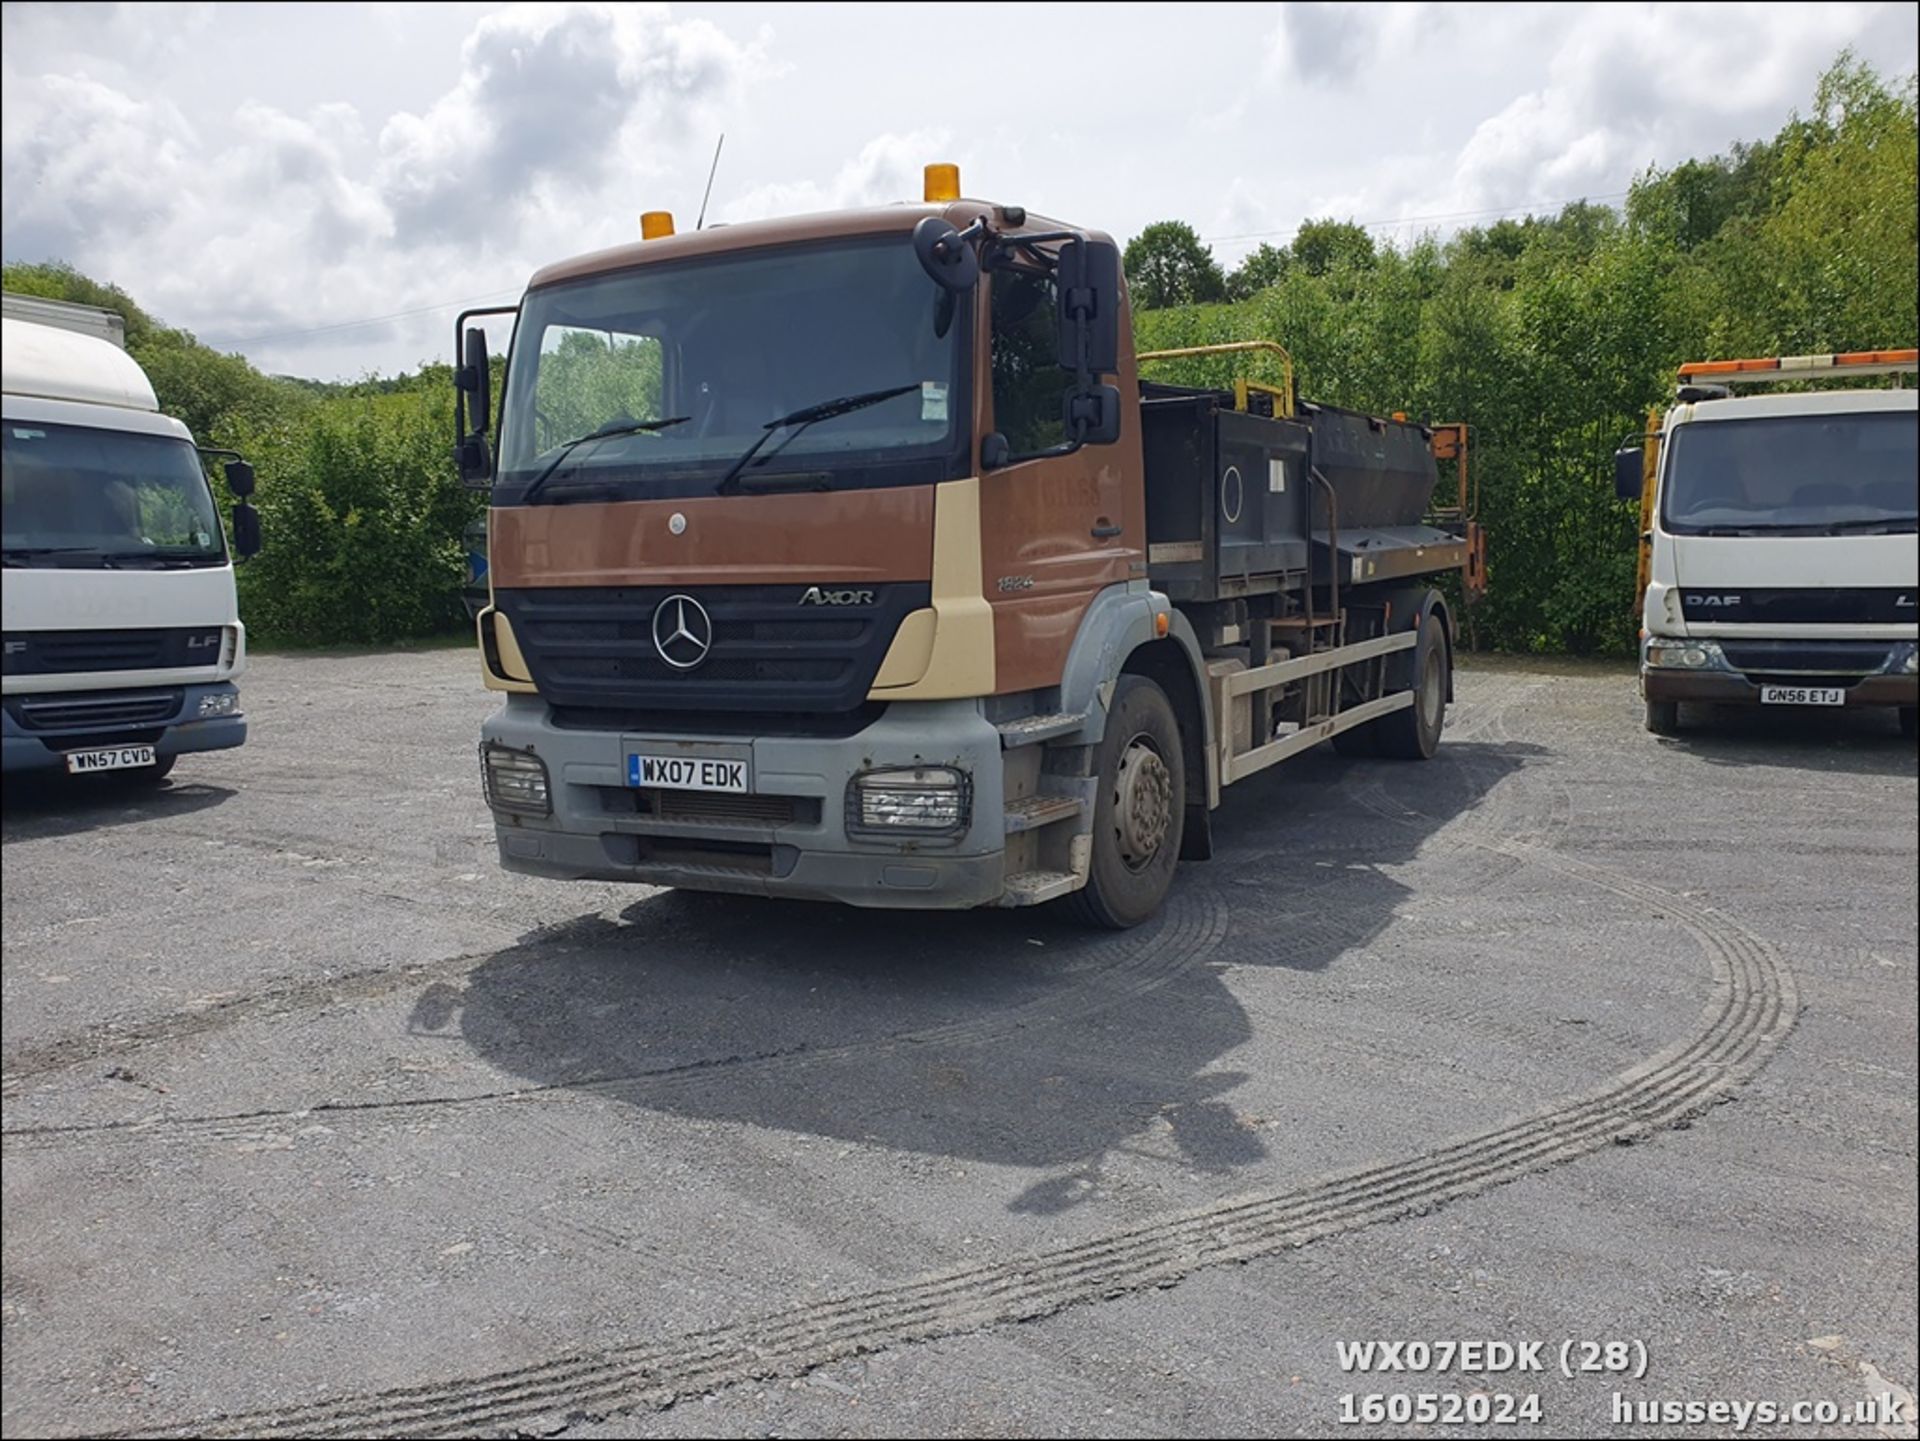 07/07 MERCEDES ATEGO - 6370cc 2dr (Brown/cream) - Image 29 of 54